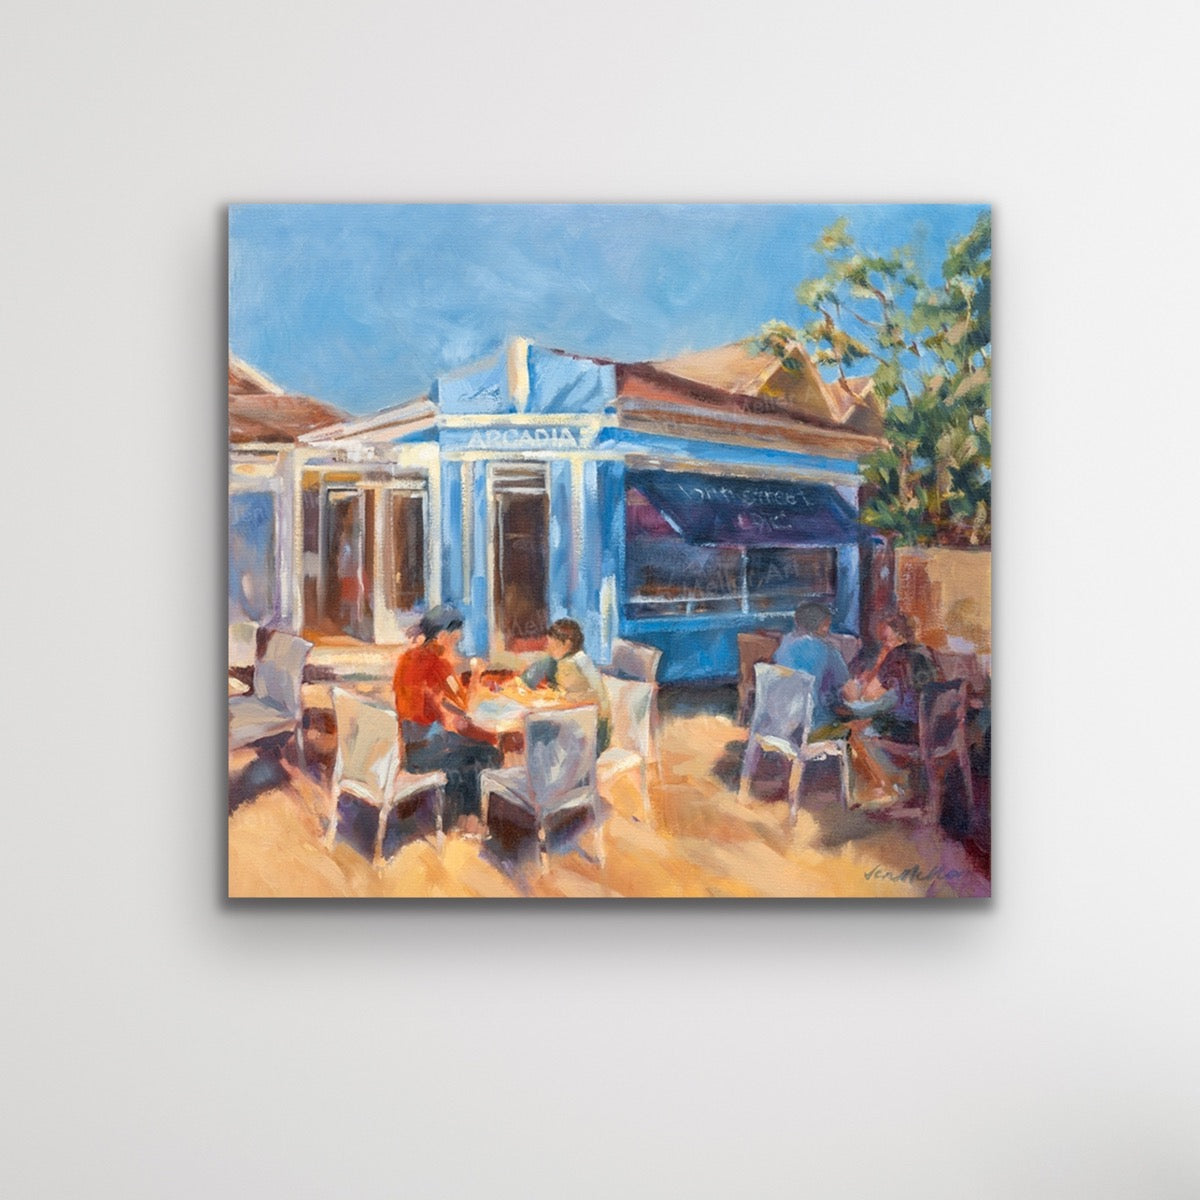 John St Cafe, Cottesloe, Perth - Limited Edition Print